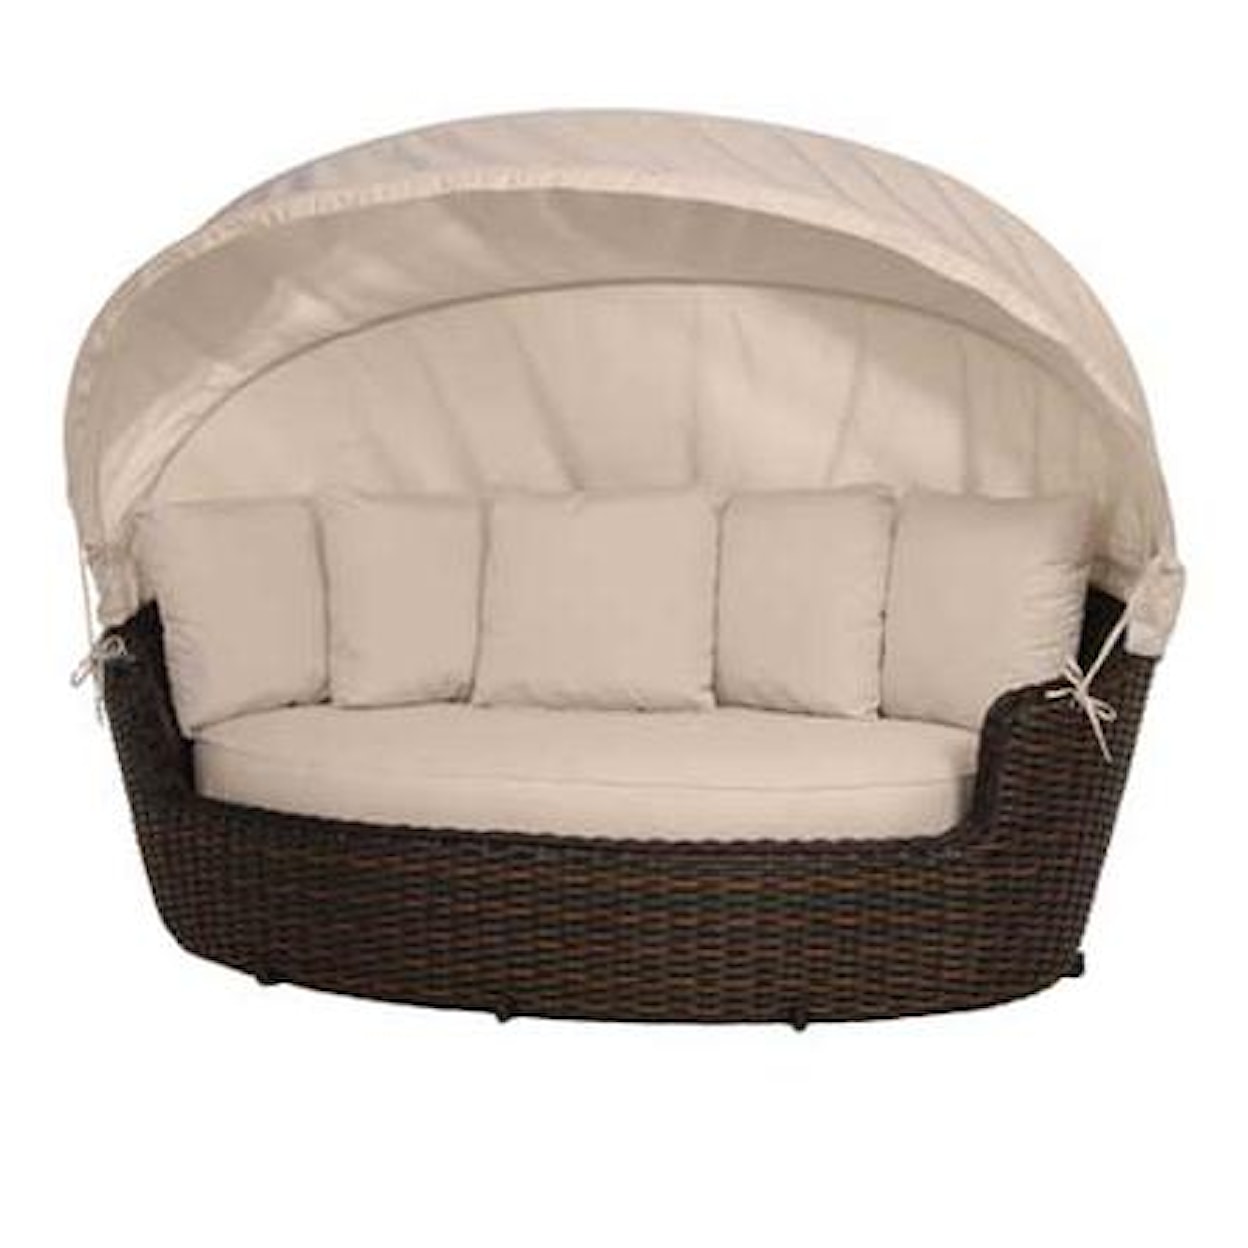 Ebel Dreux Daybed with Canopy Hardware